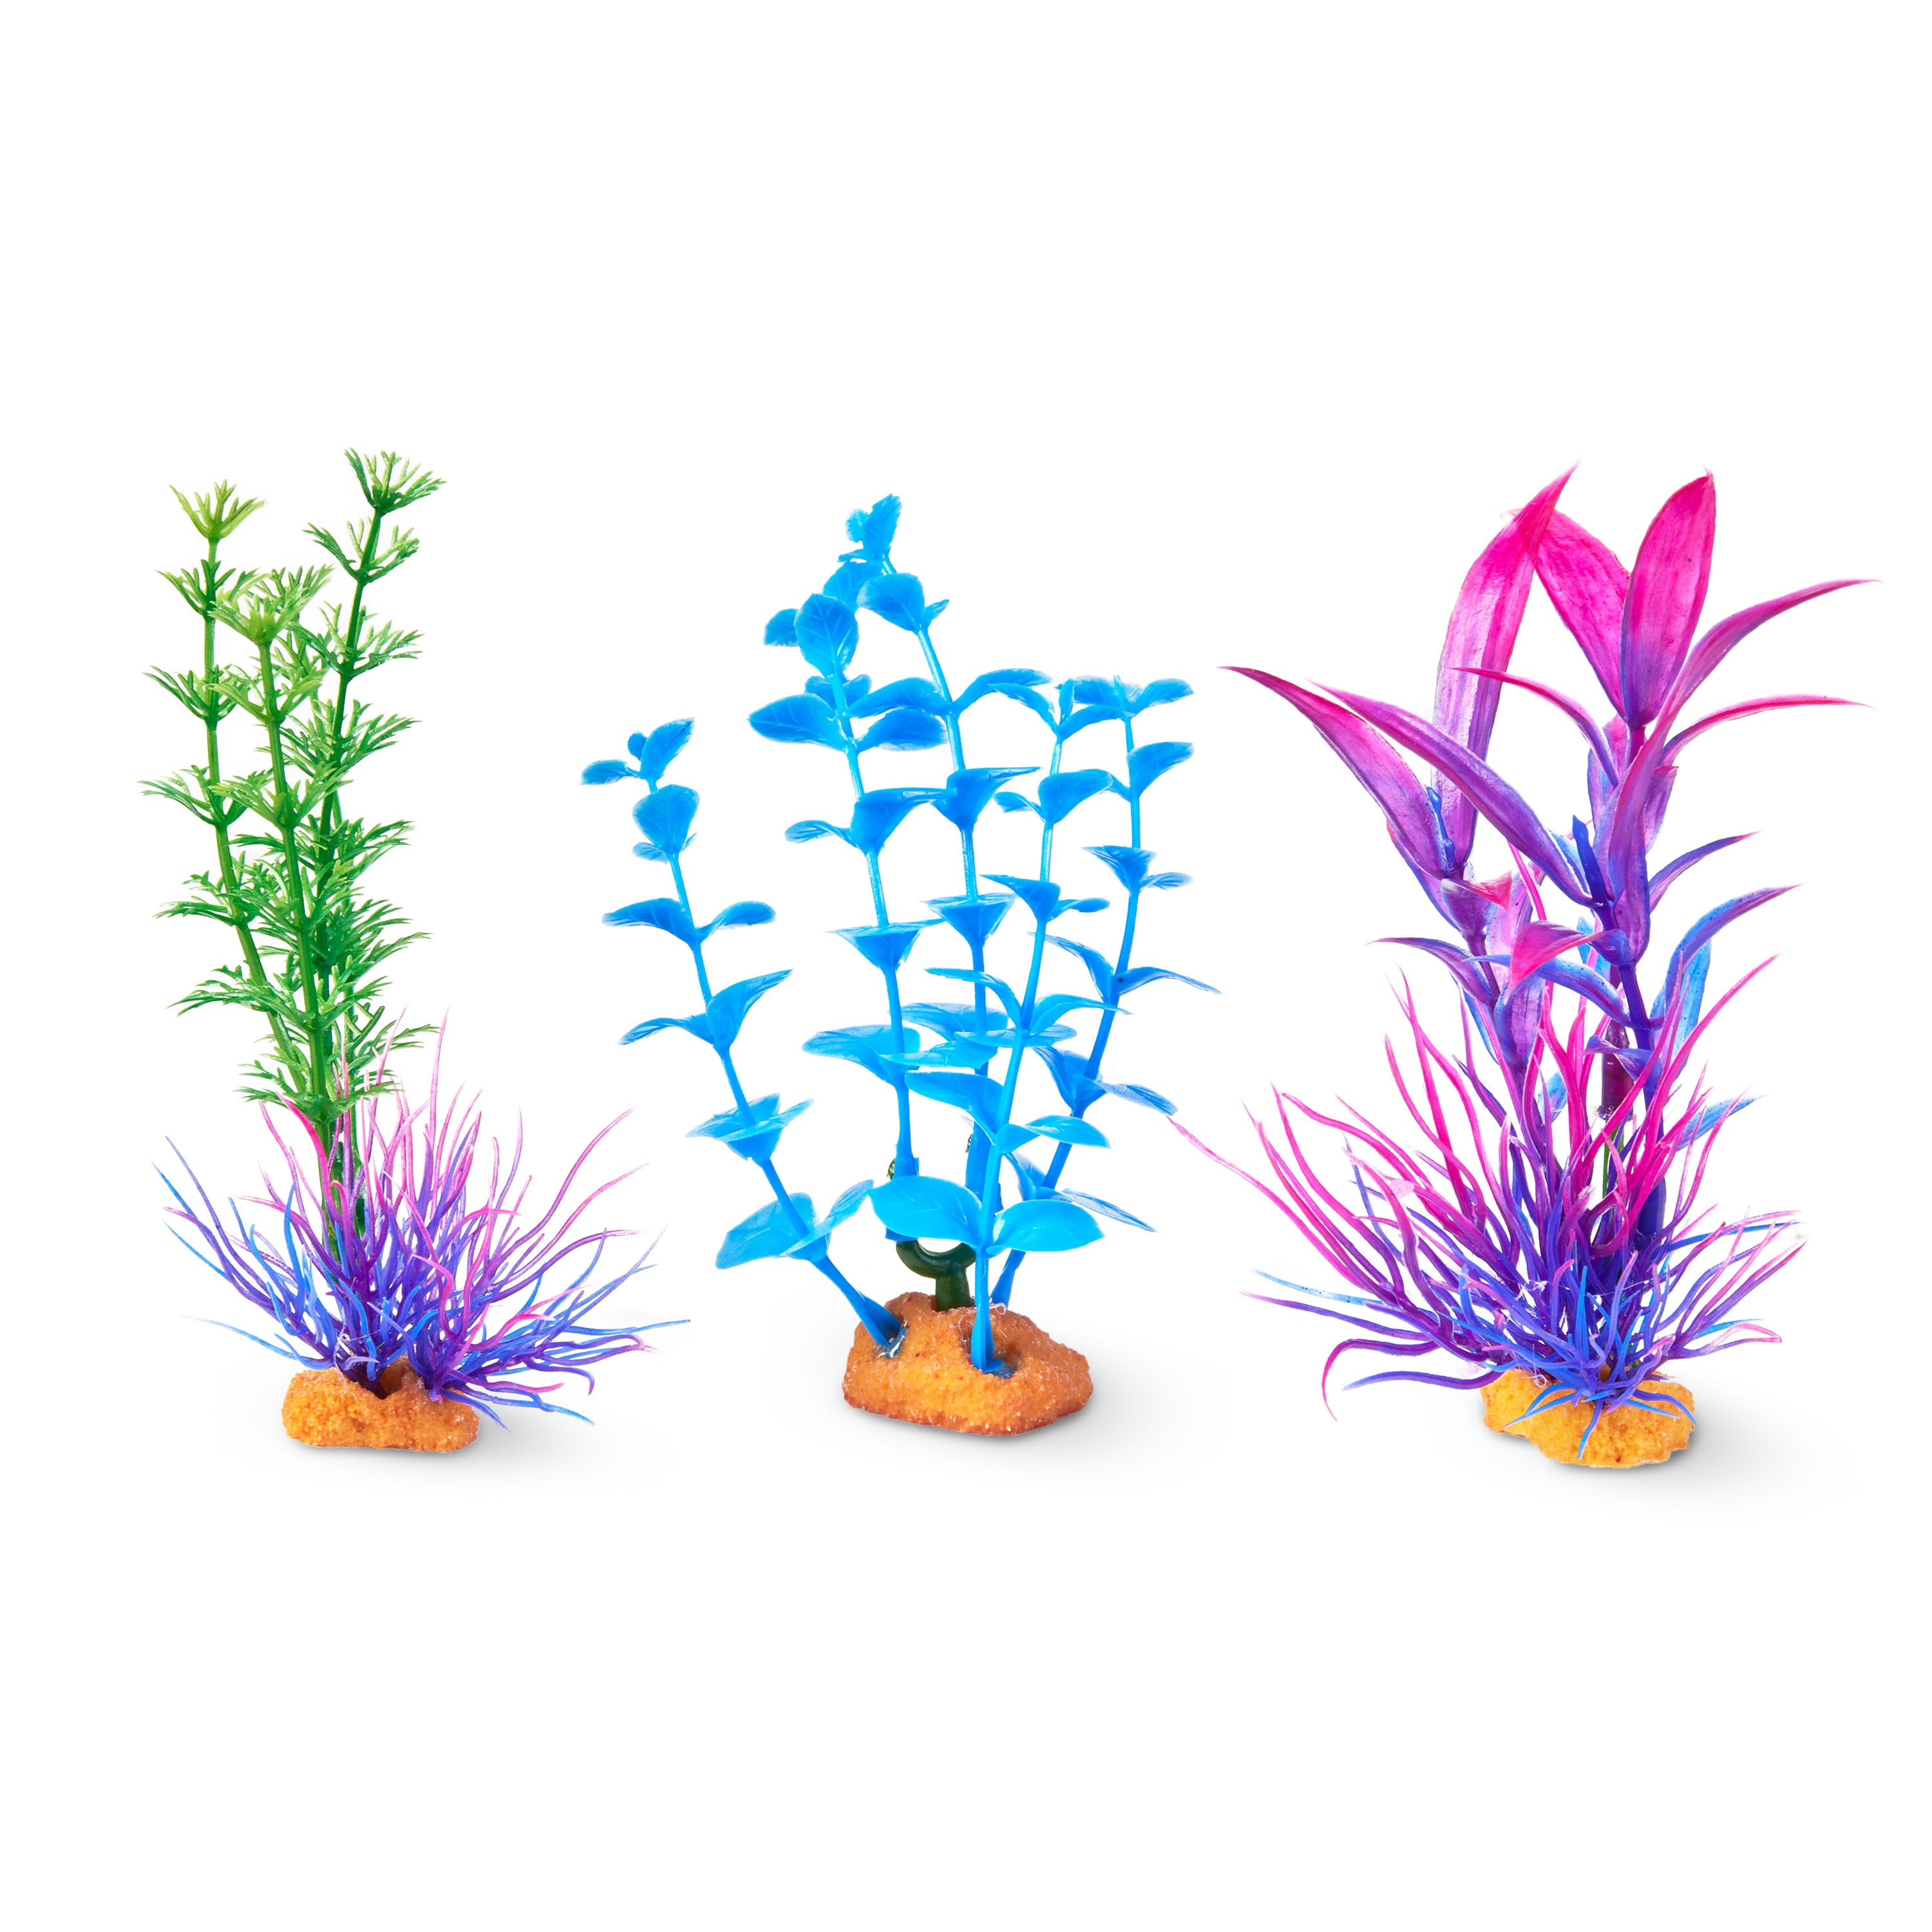 Are Fake Plants Good to Use in an Aquarium?